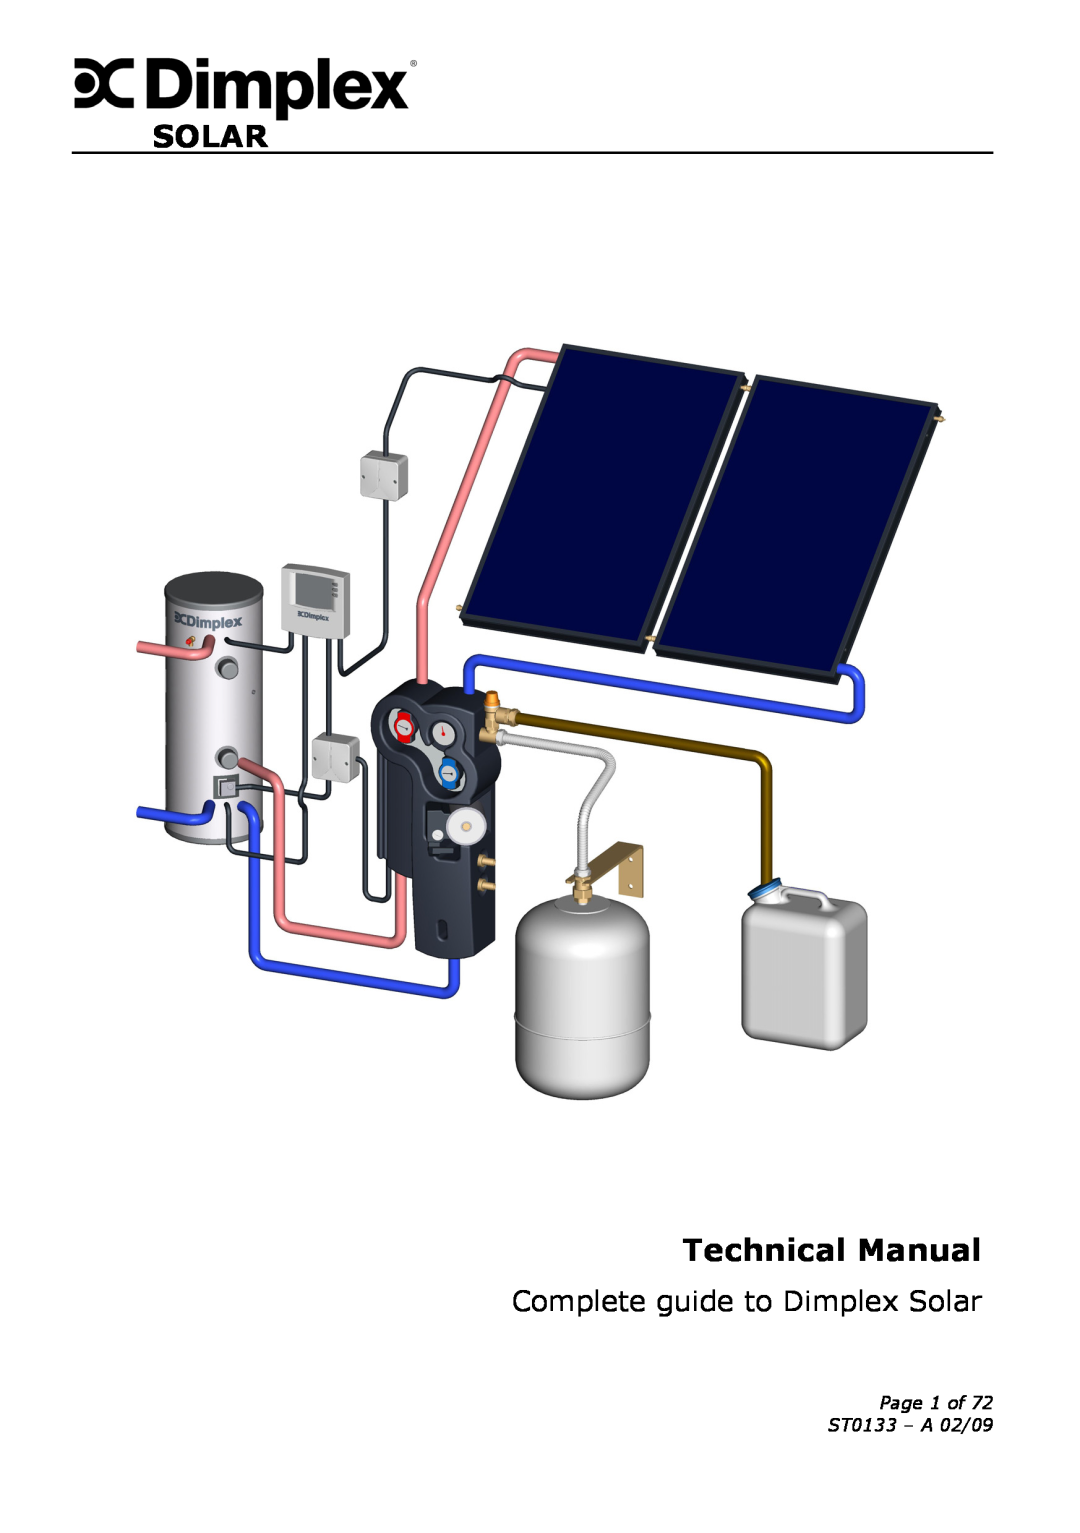 Dimplex technical manual SOLAR Technical Manual, Complete guide to Dimplex Solar, Page 1 of ST0133 - A 02/09 